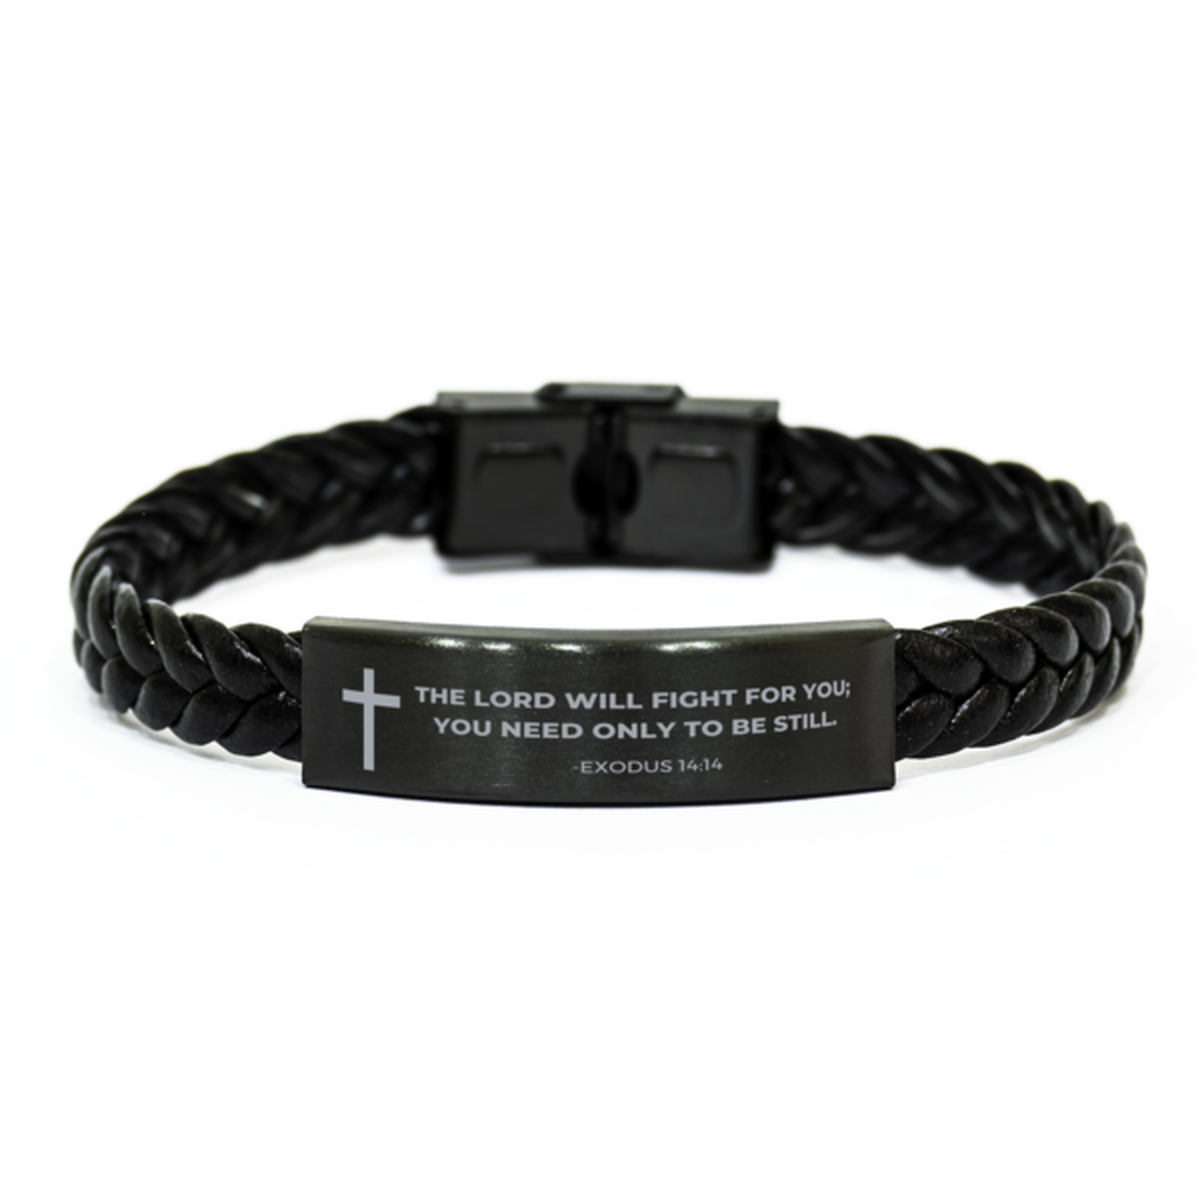 Baptism Gifts For Teenage Boys Girls, Christian Bible Verse Braided Leather Bracelet, The Lord will fight for you, Catholic Confirmation Gifts for Son, Godson, Grandson, Nephew